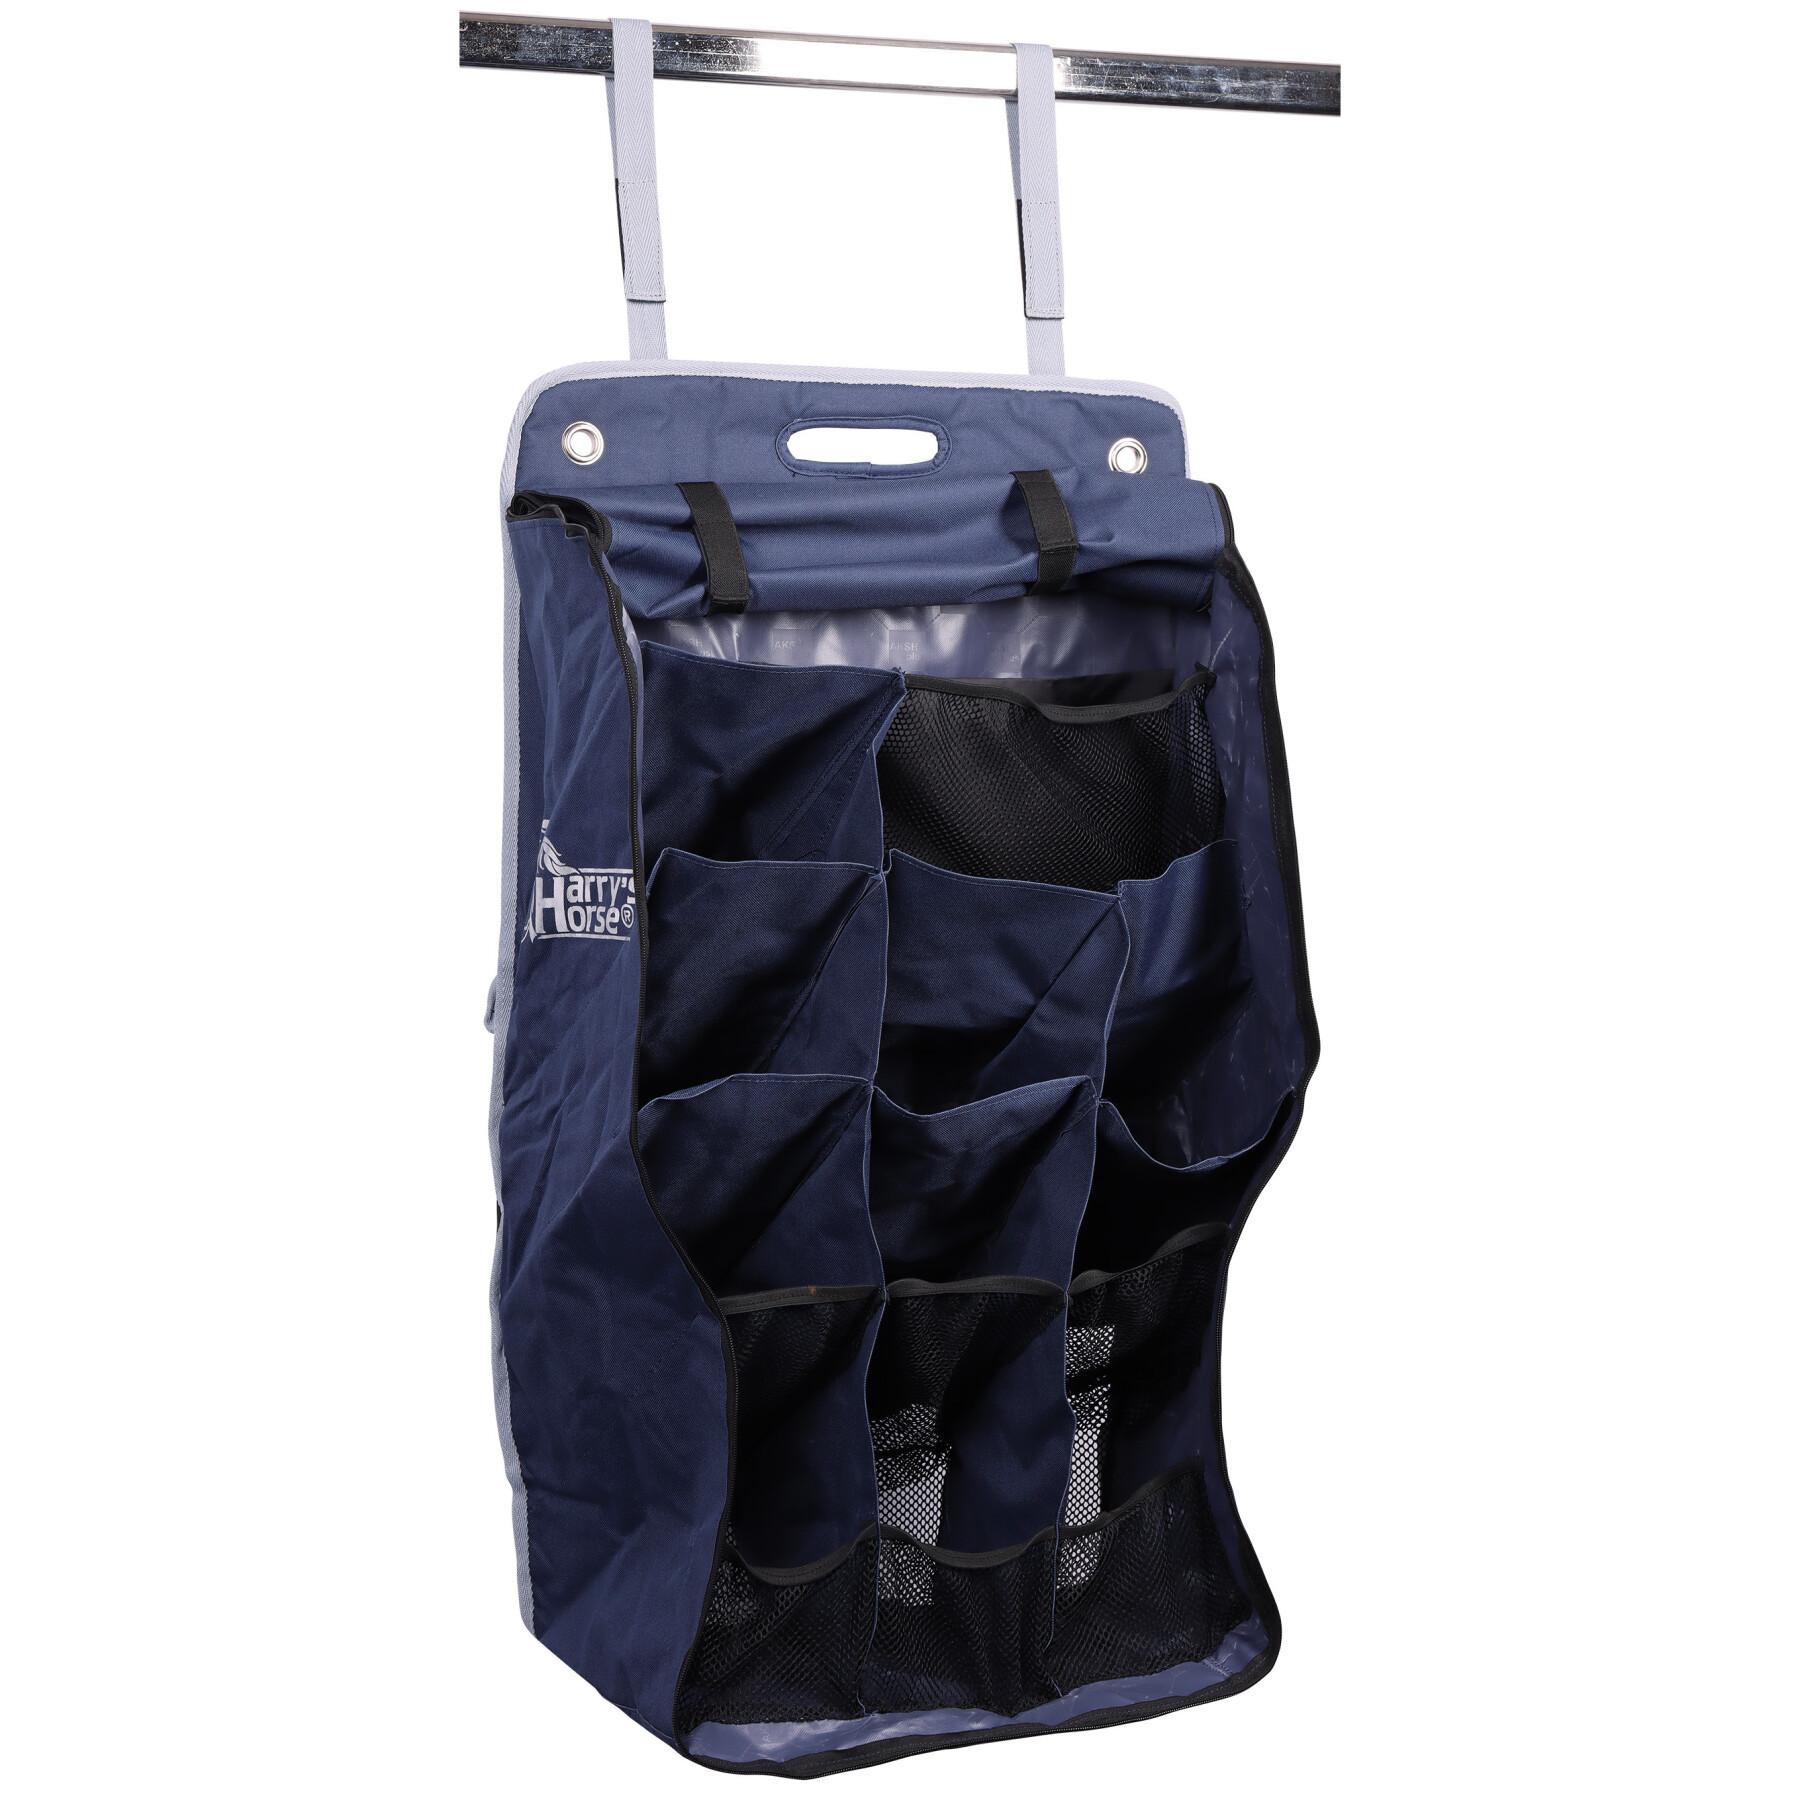 Stable organizer bag Harry's Horse